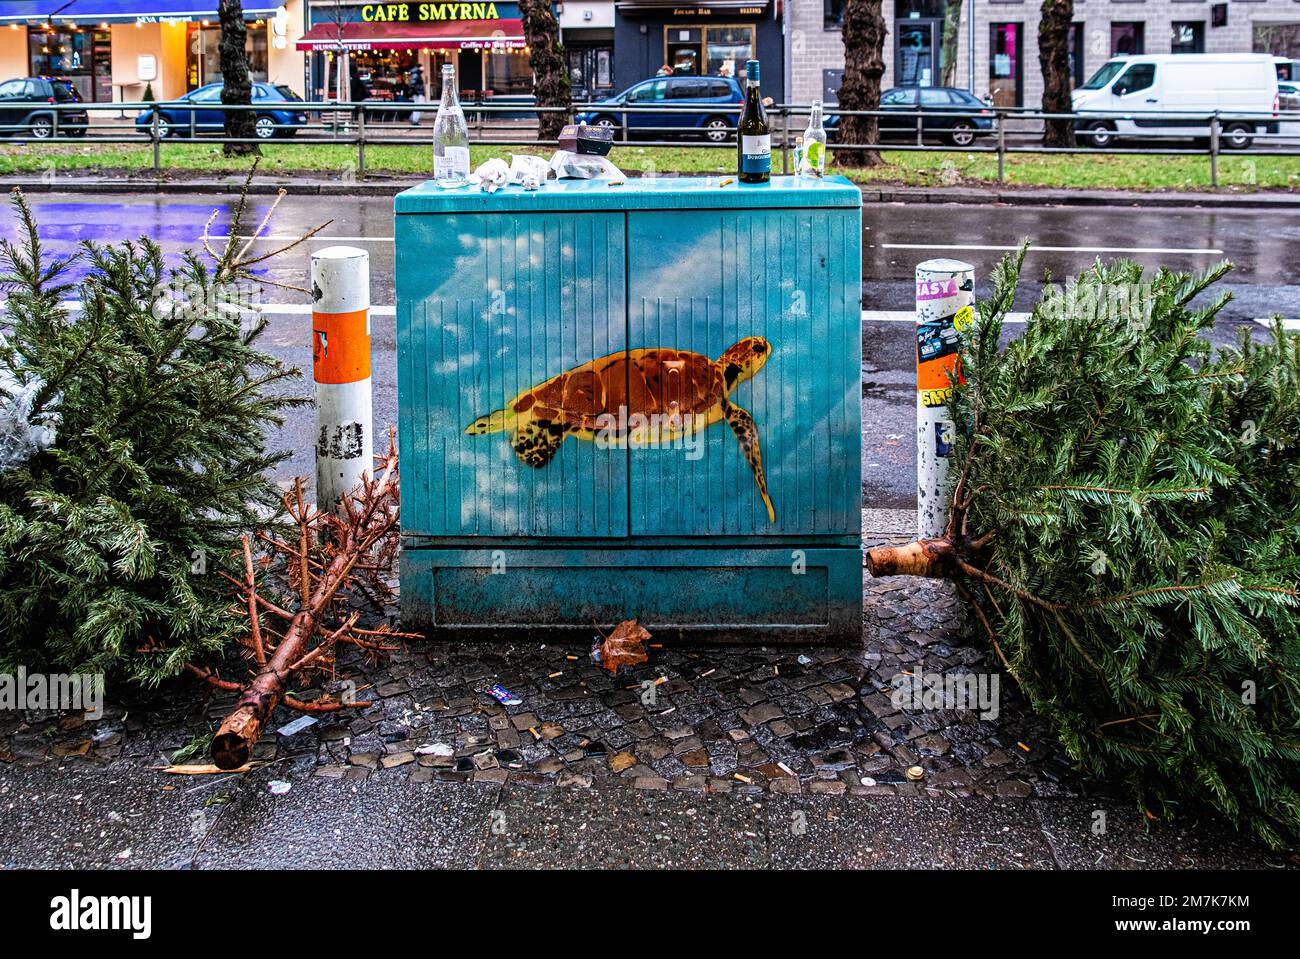 Dumped Christmas trees next to painted utility box in Hauptstrasse, Schöneberg, Berlin, Germany Stock Photo